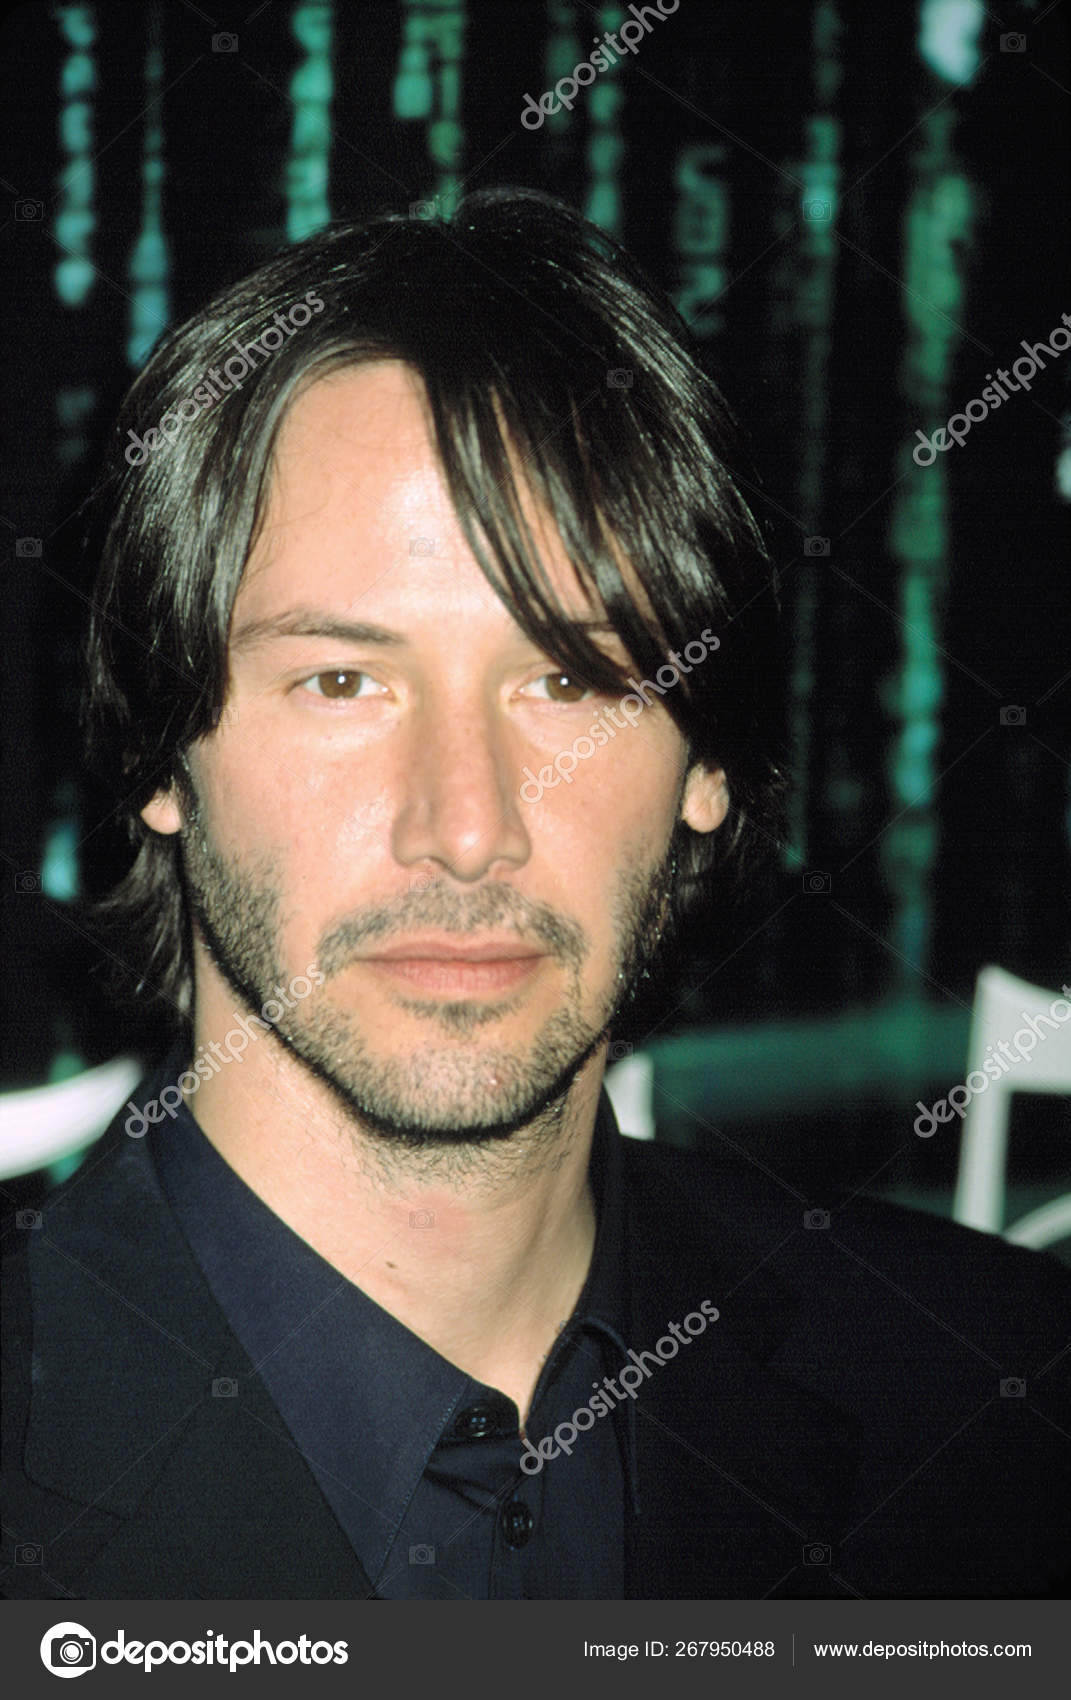 Keanu Reeves has a buzzcut for 'The Matrix 4'